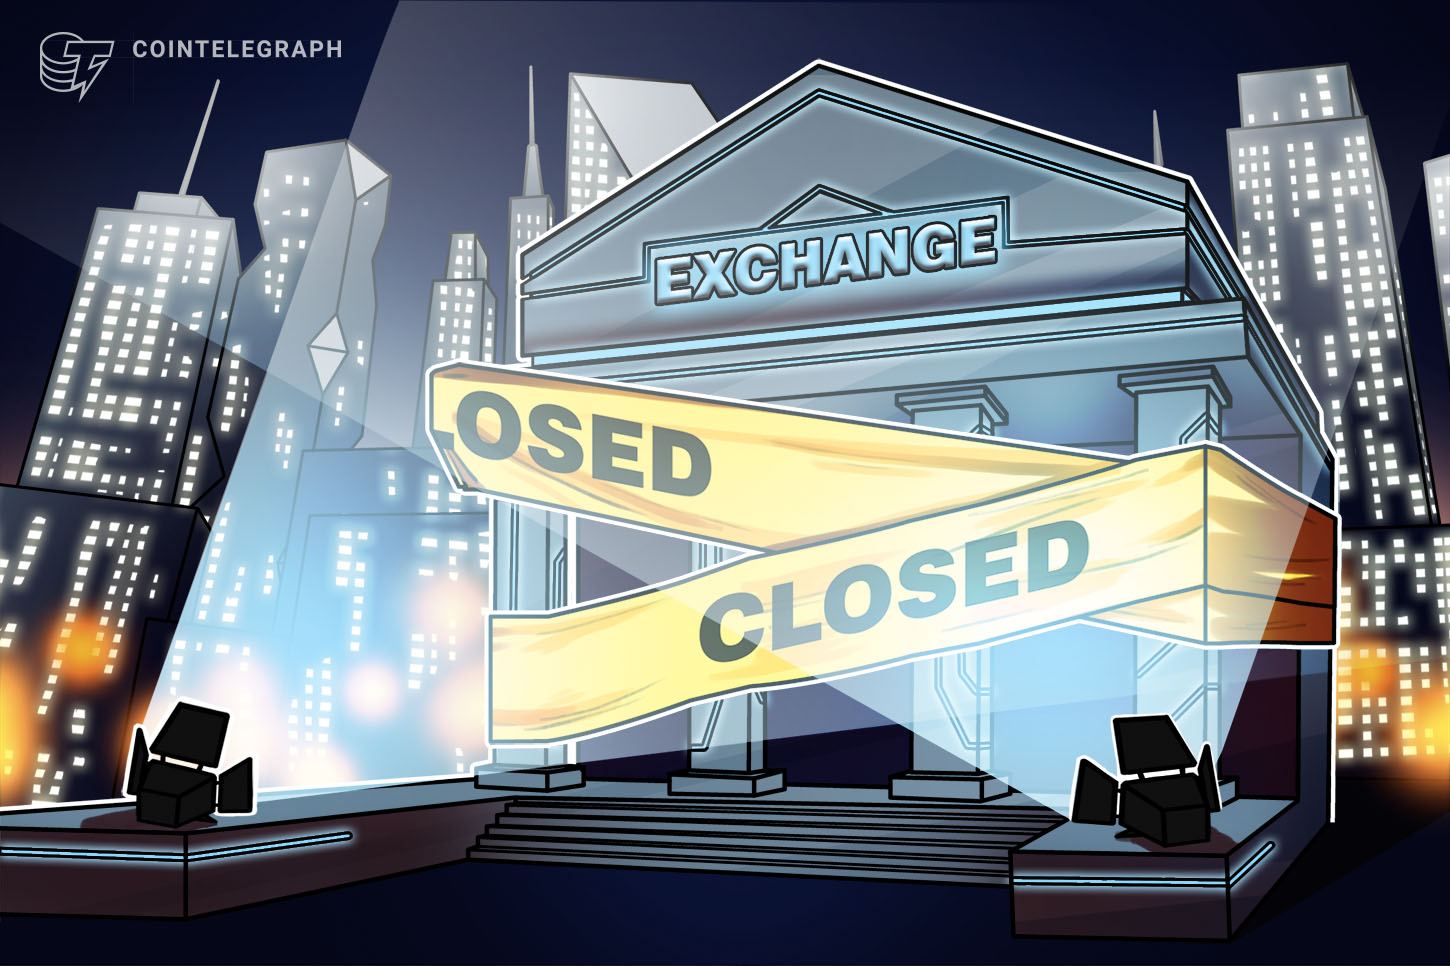 75 crypto exchanges have closed down thus far in 2020